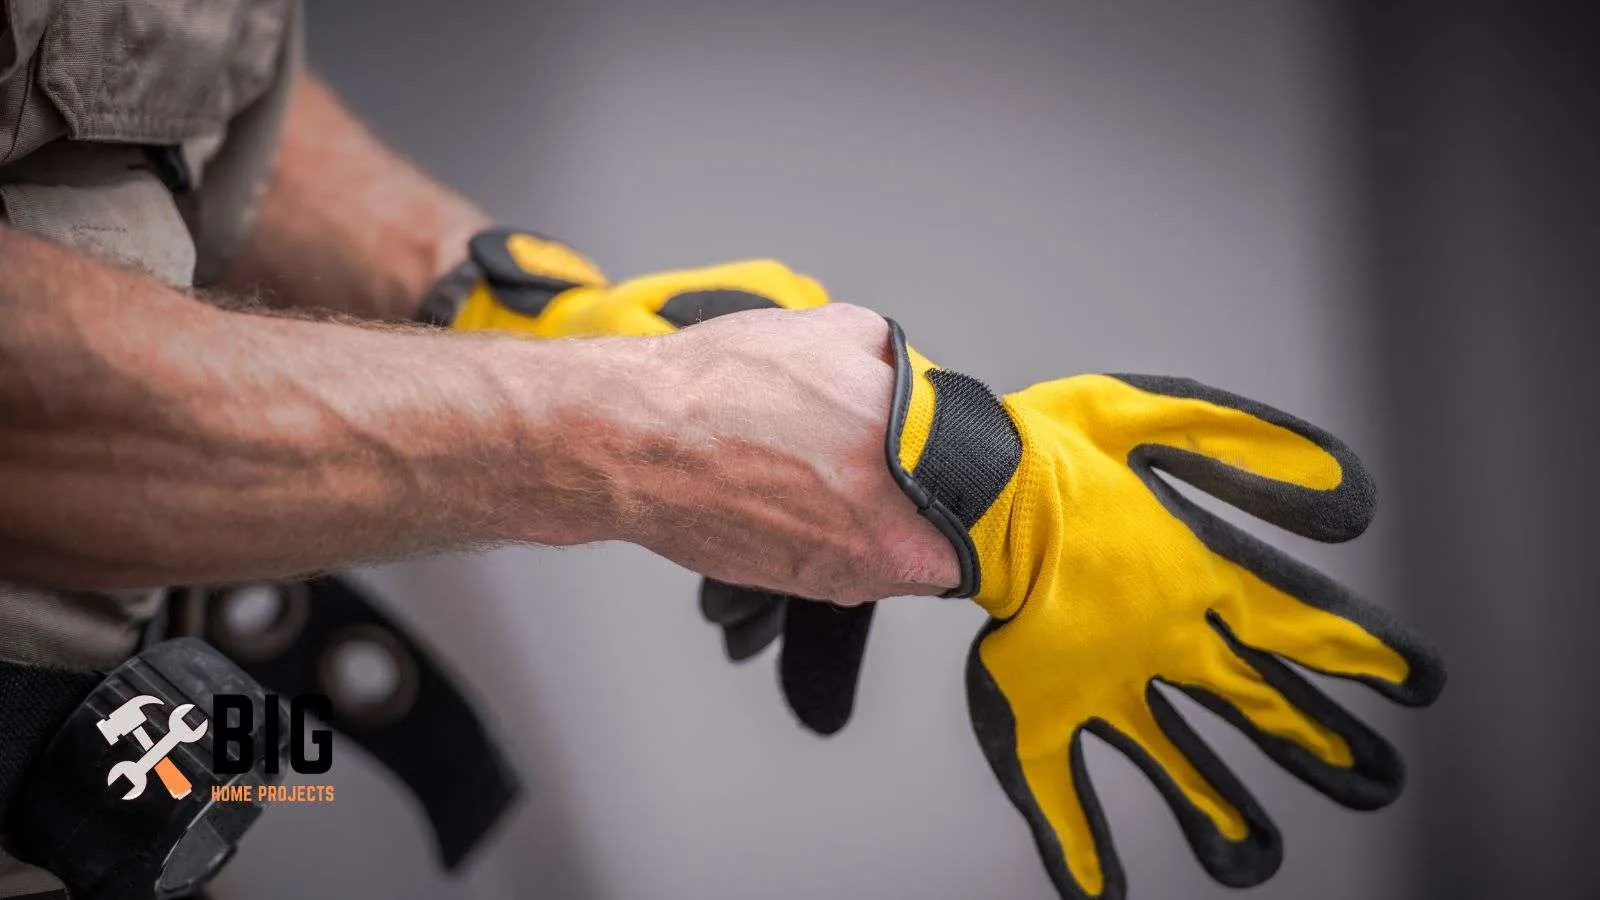 Plumber putting on gloves - bighomeprojects.com